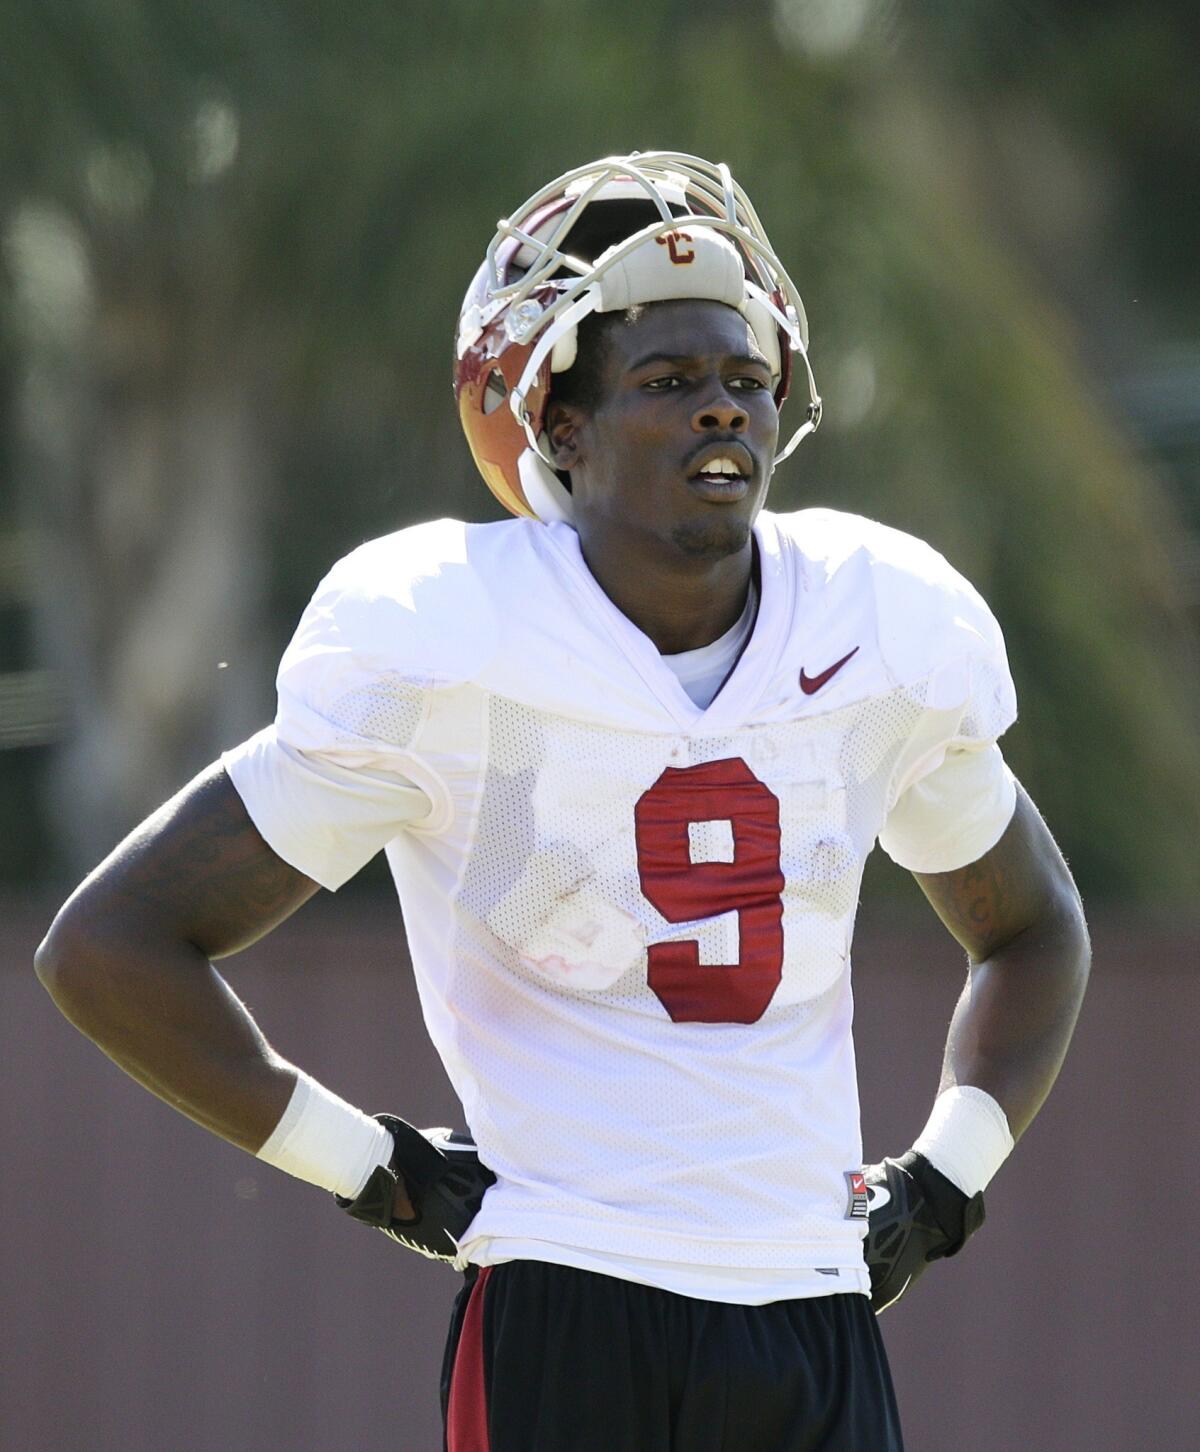 USC says wide receiver Marqise Lee did not violate NCAA rules when he signed autographs in Florida earlier this year.